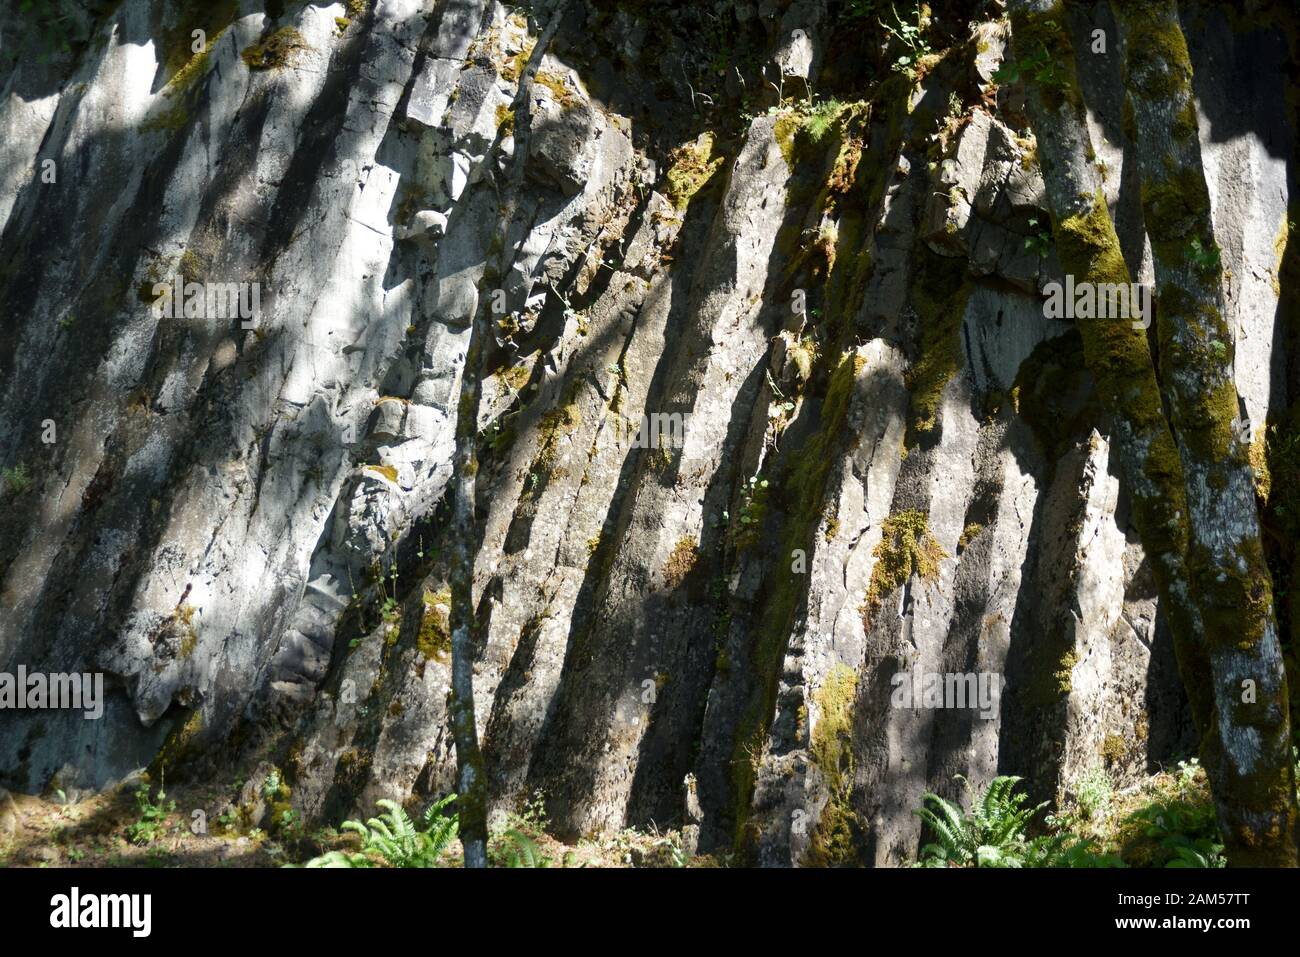 A columnar basalt cliff at Starvation Creek in the Columbia Gorge, Oregon.  The picture was taken in Spring. Stock Photo